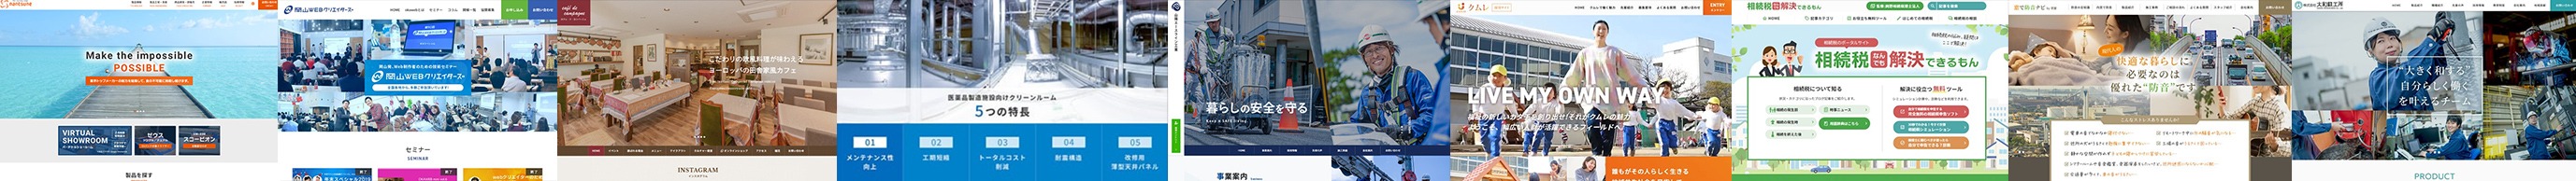 WORKS サムネイル一覧